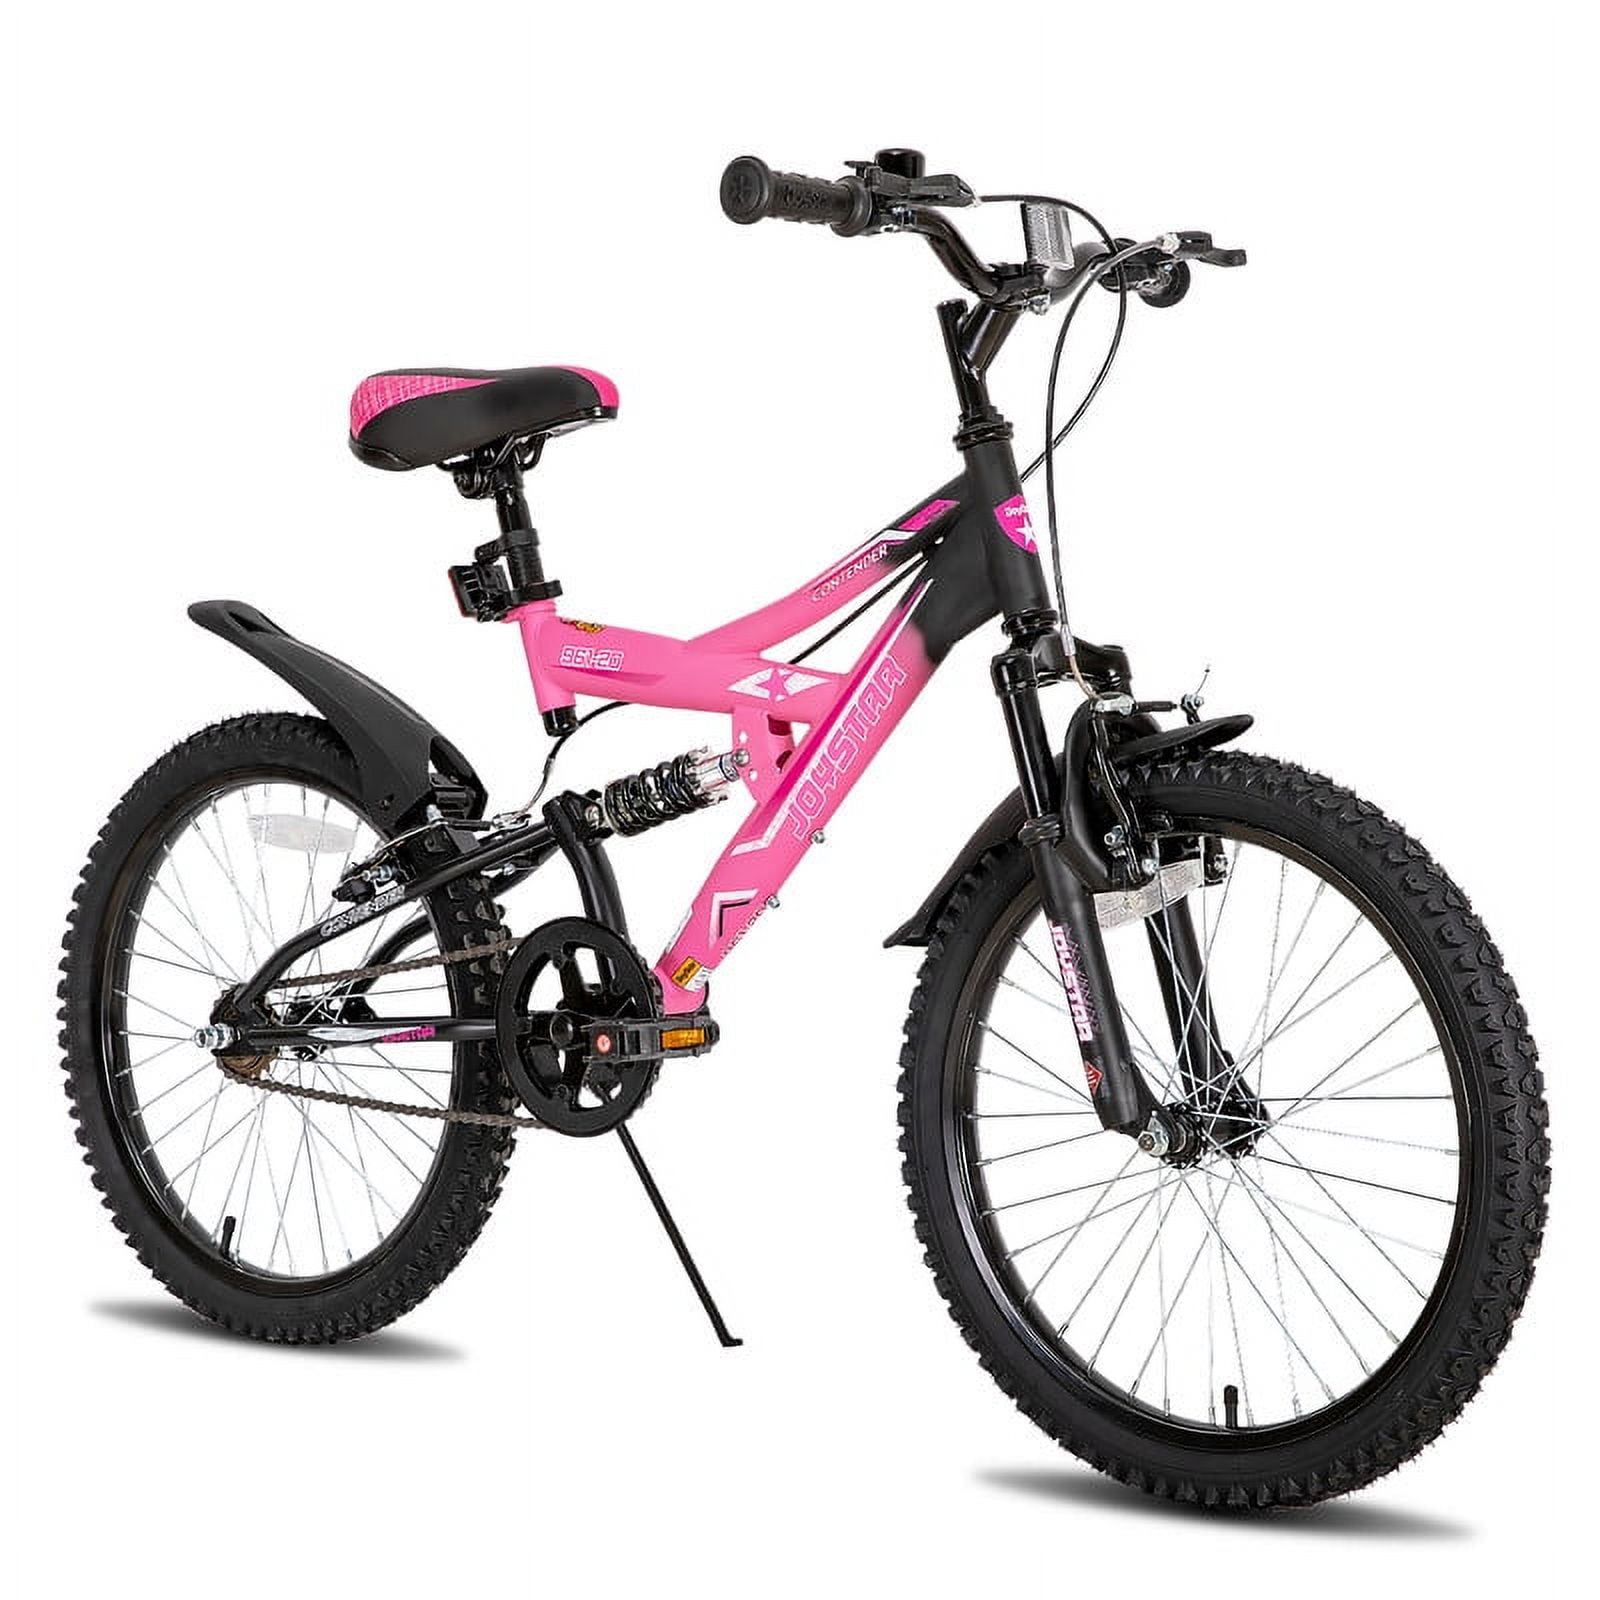 JOYSTAR Contender 20 Inch Kids Mountain Bike for 7-13 Years Boys & Girls,  Kids Bicycle with Full Dual-Suspension Steel Frame and 1-Speed Drivetrain  